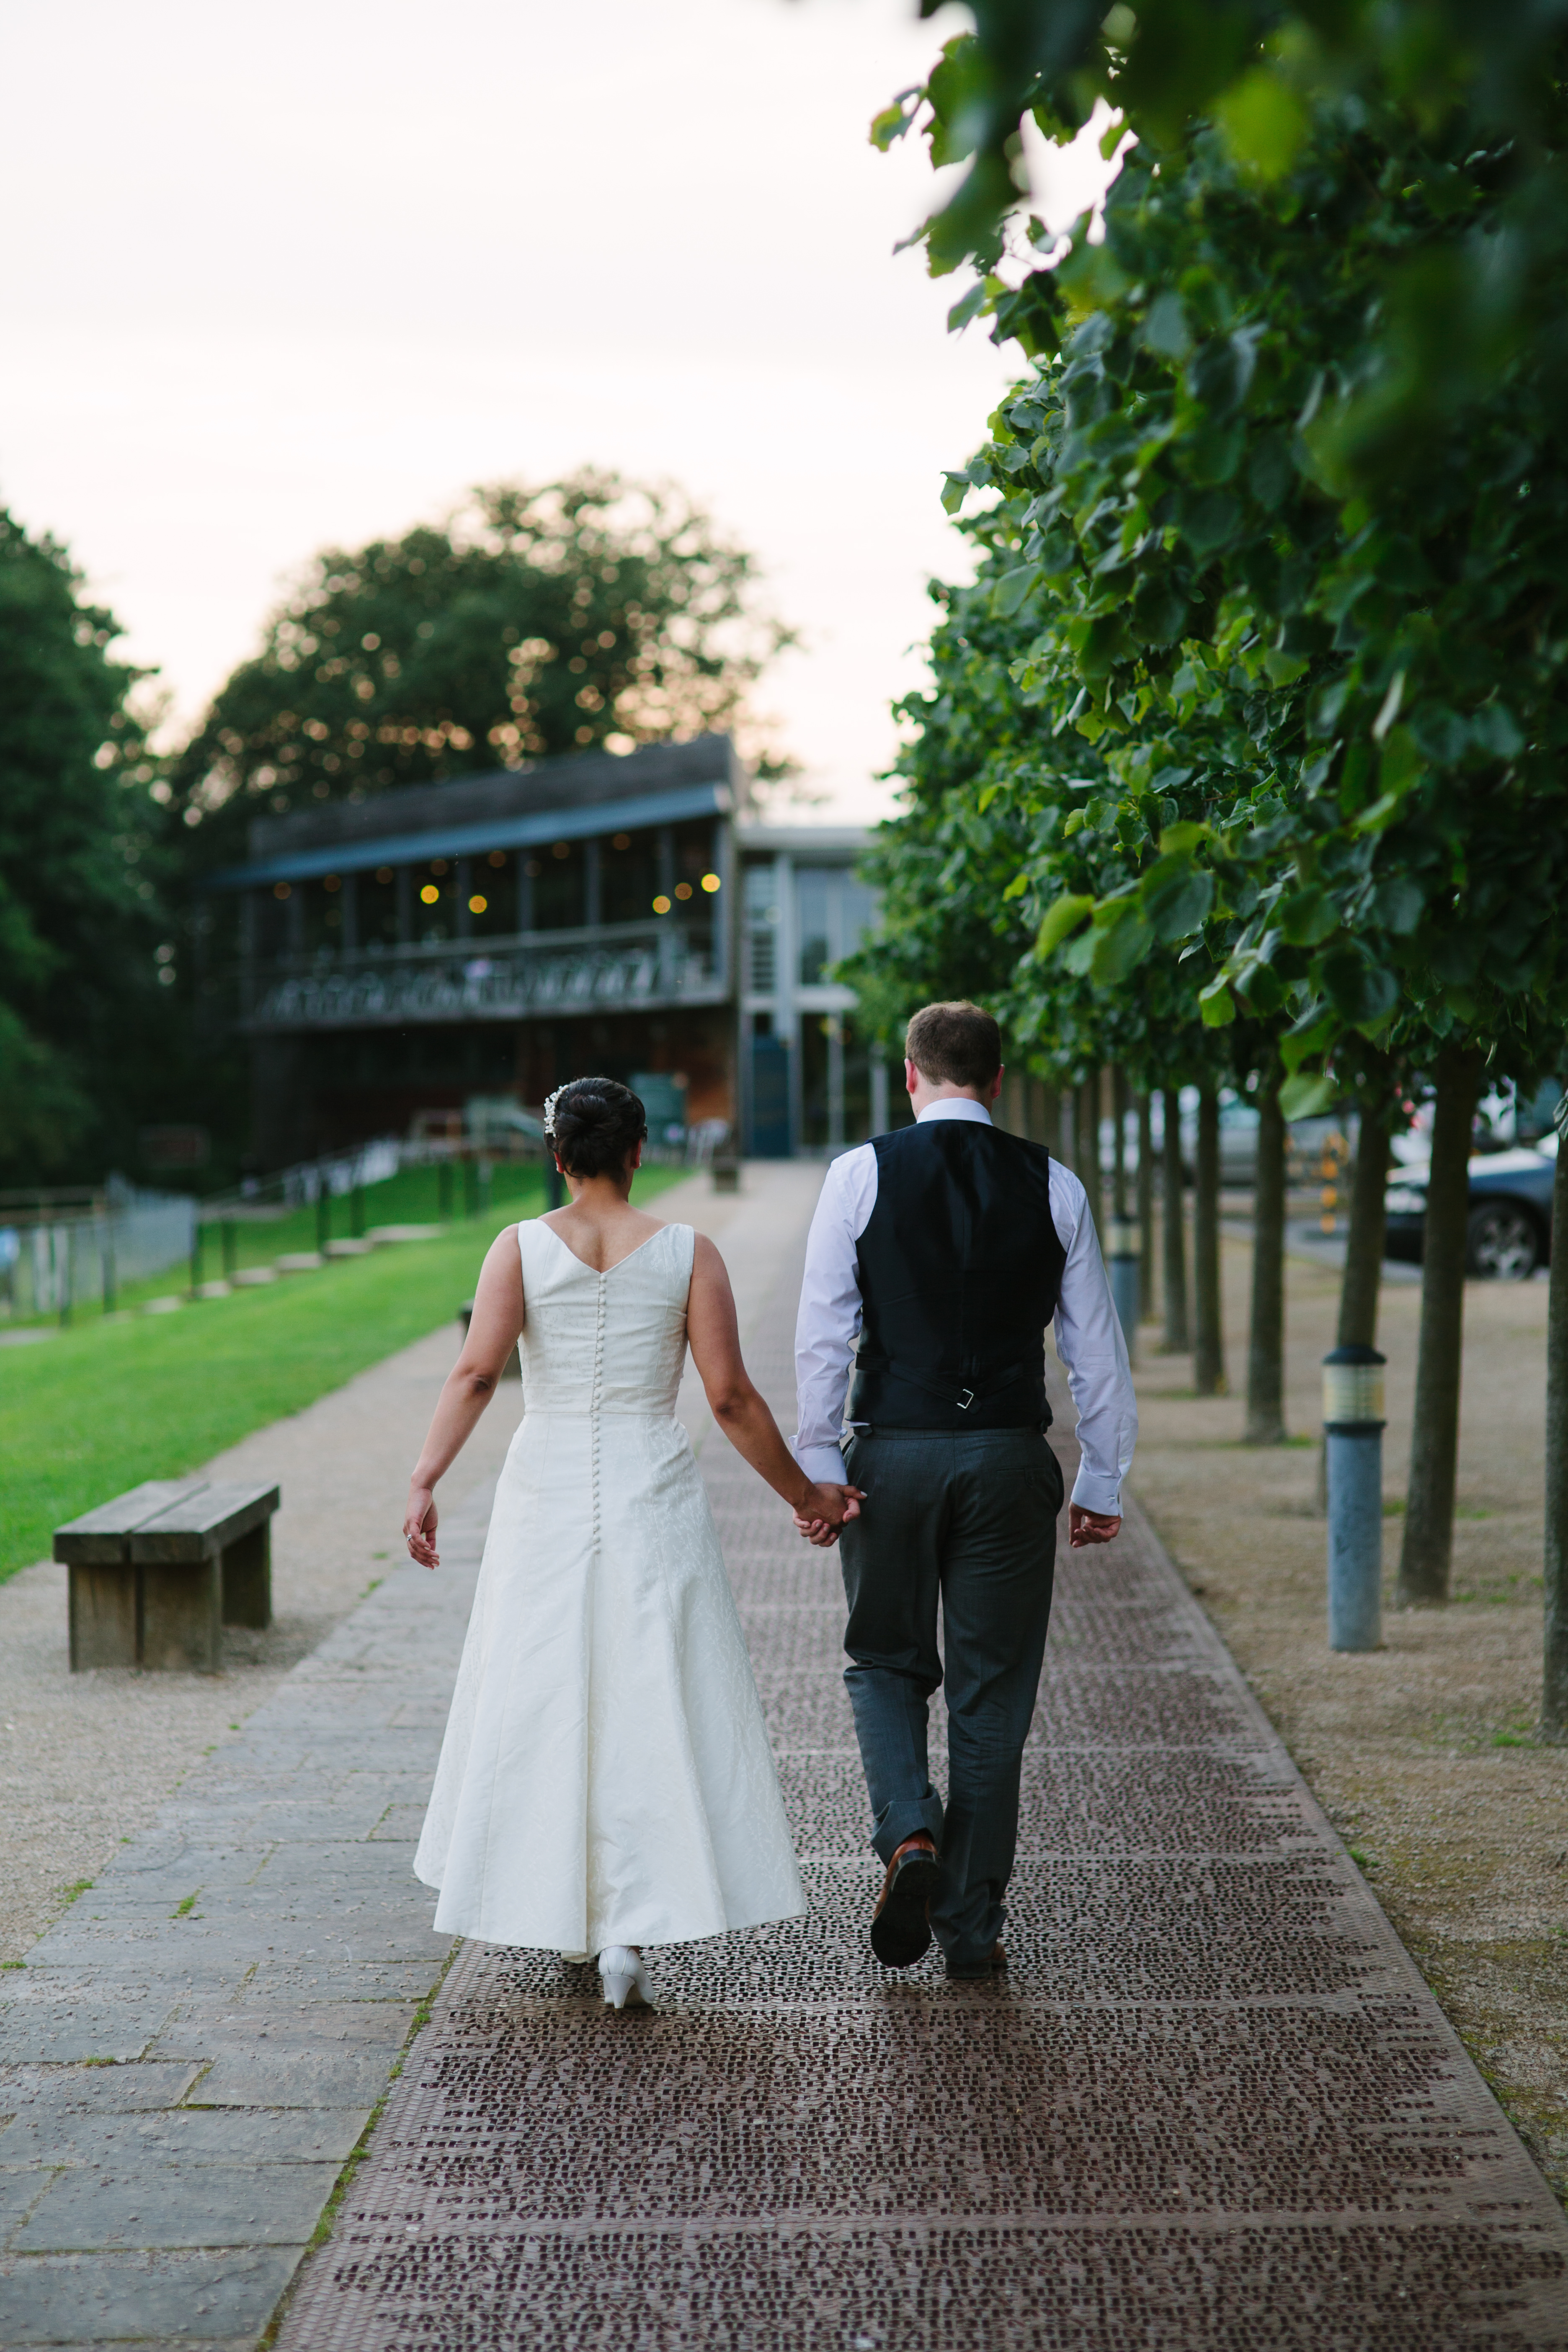 A bride and groom walking along a metal walkway covered in names, towards YSP Centre